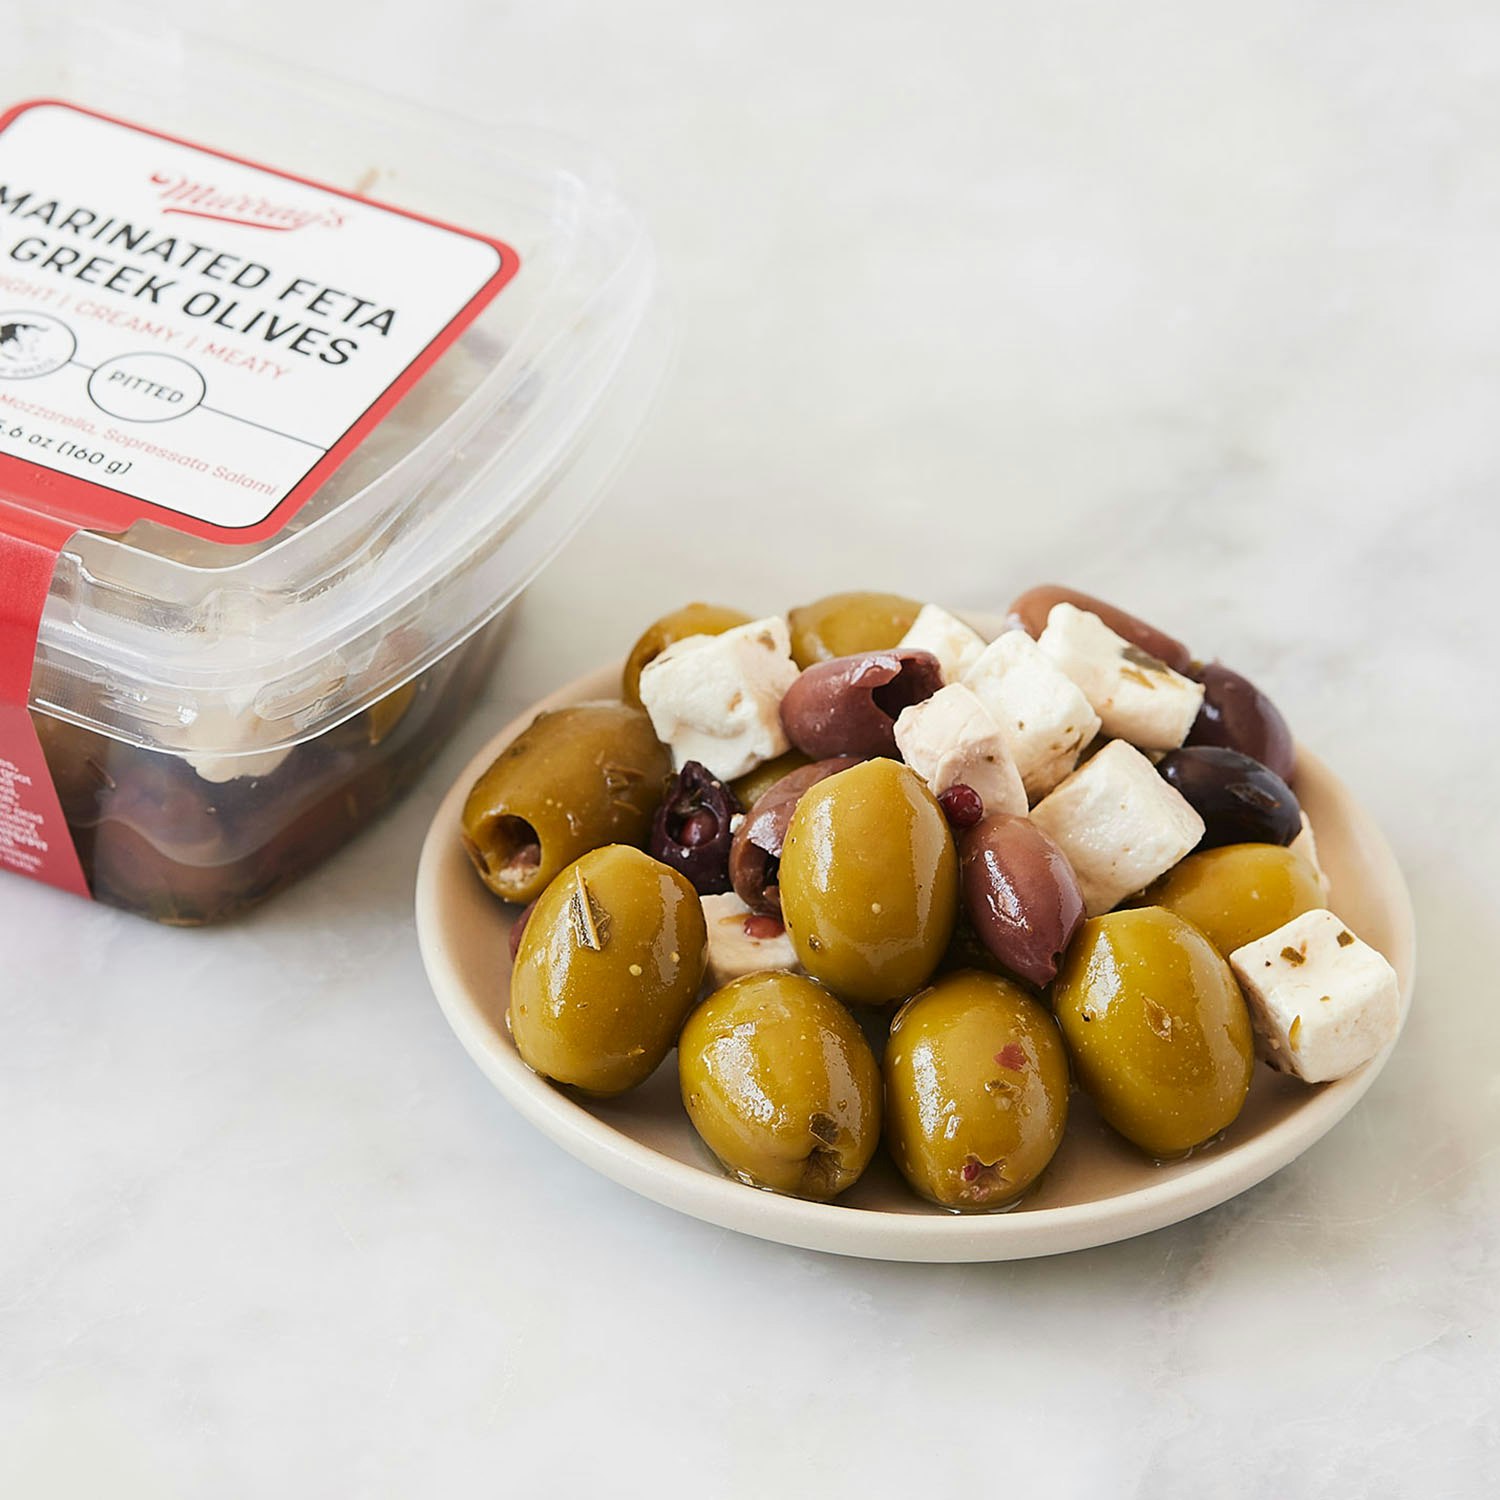 Murrays-Marinated-Feta-And-Greek-Olives-specialty-foods-127343-01